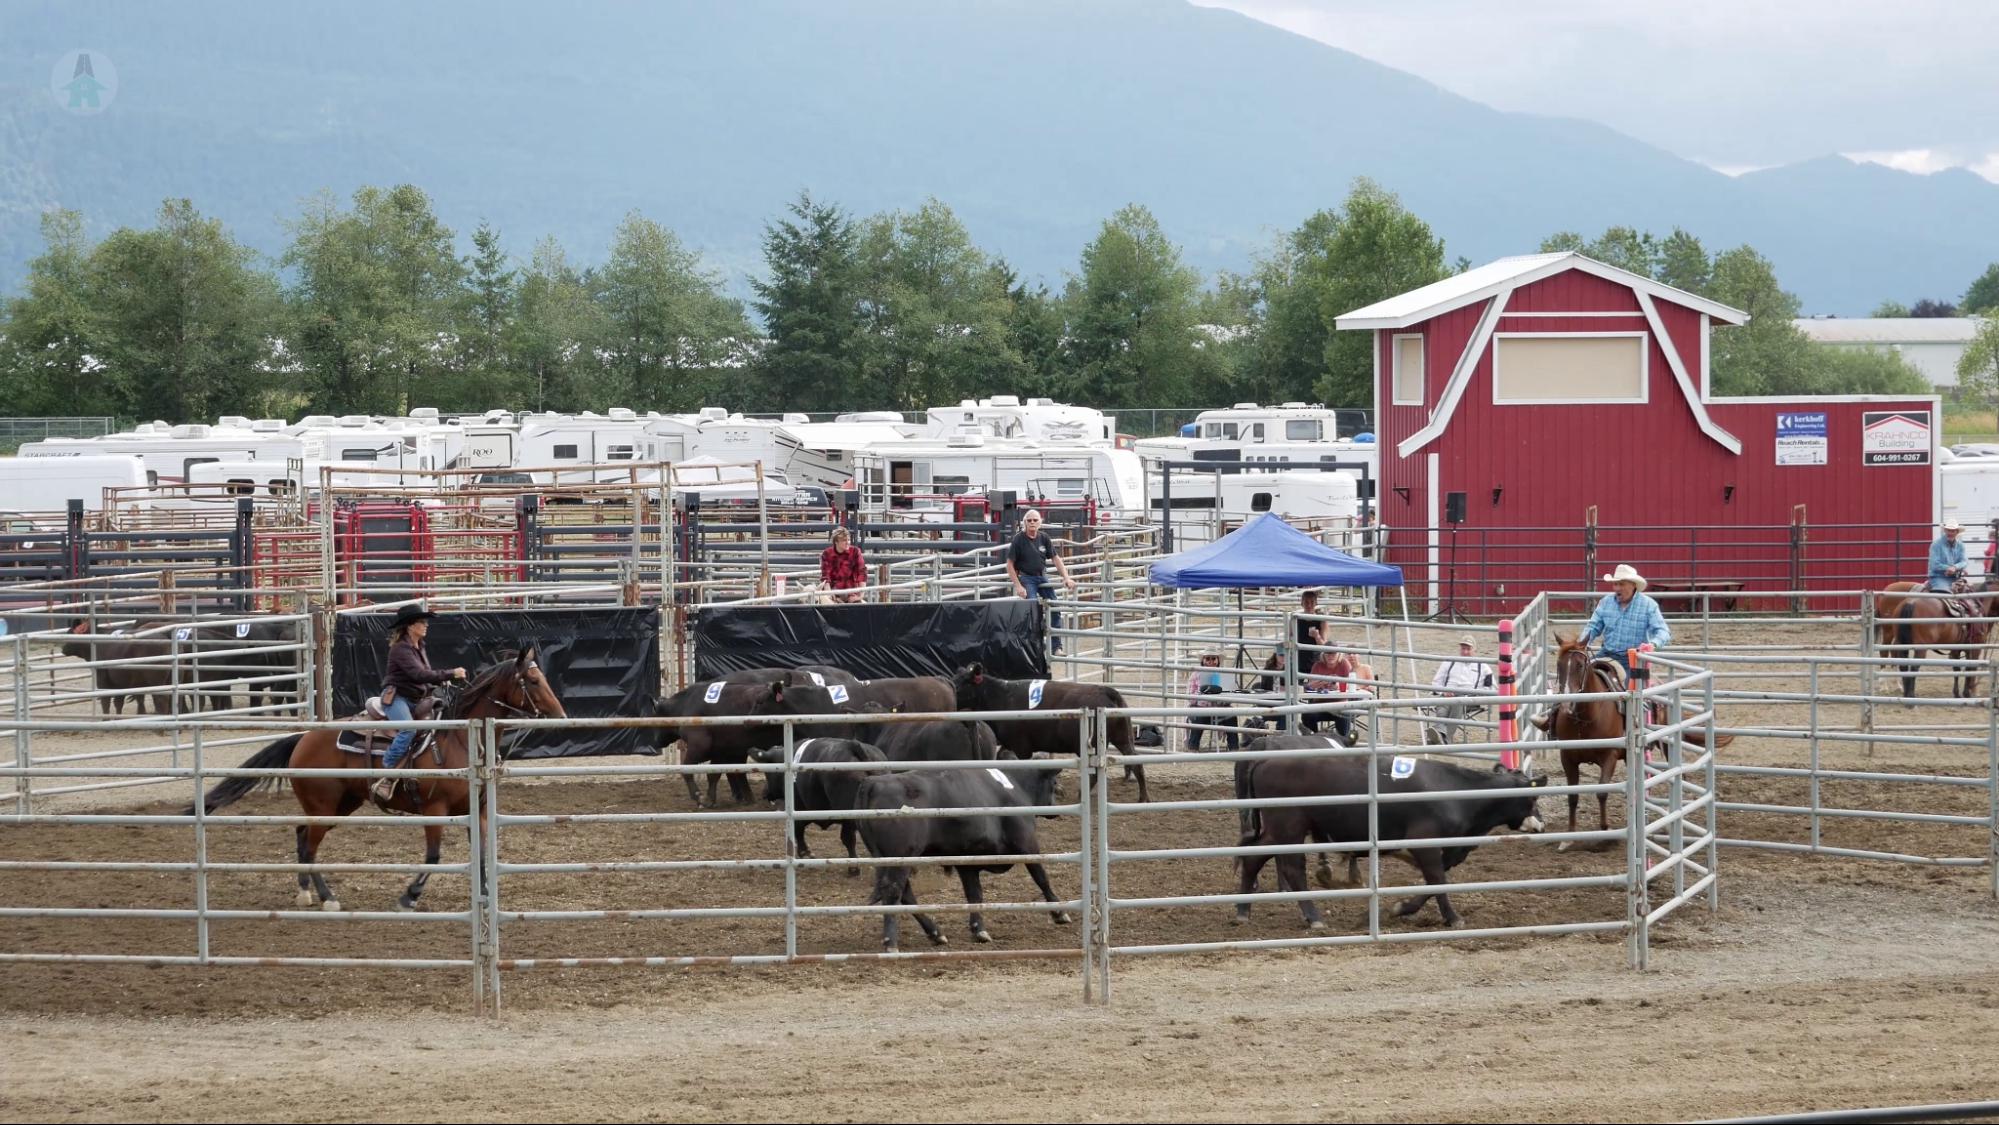 One team works to move cattle from one pen to another in numerical order in the fastest time possible. 